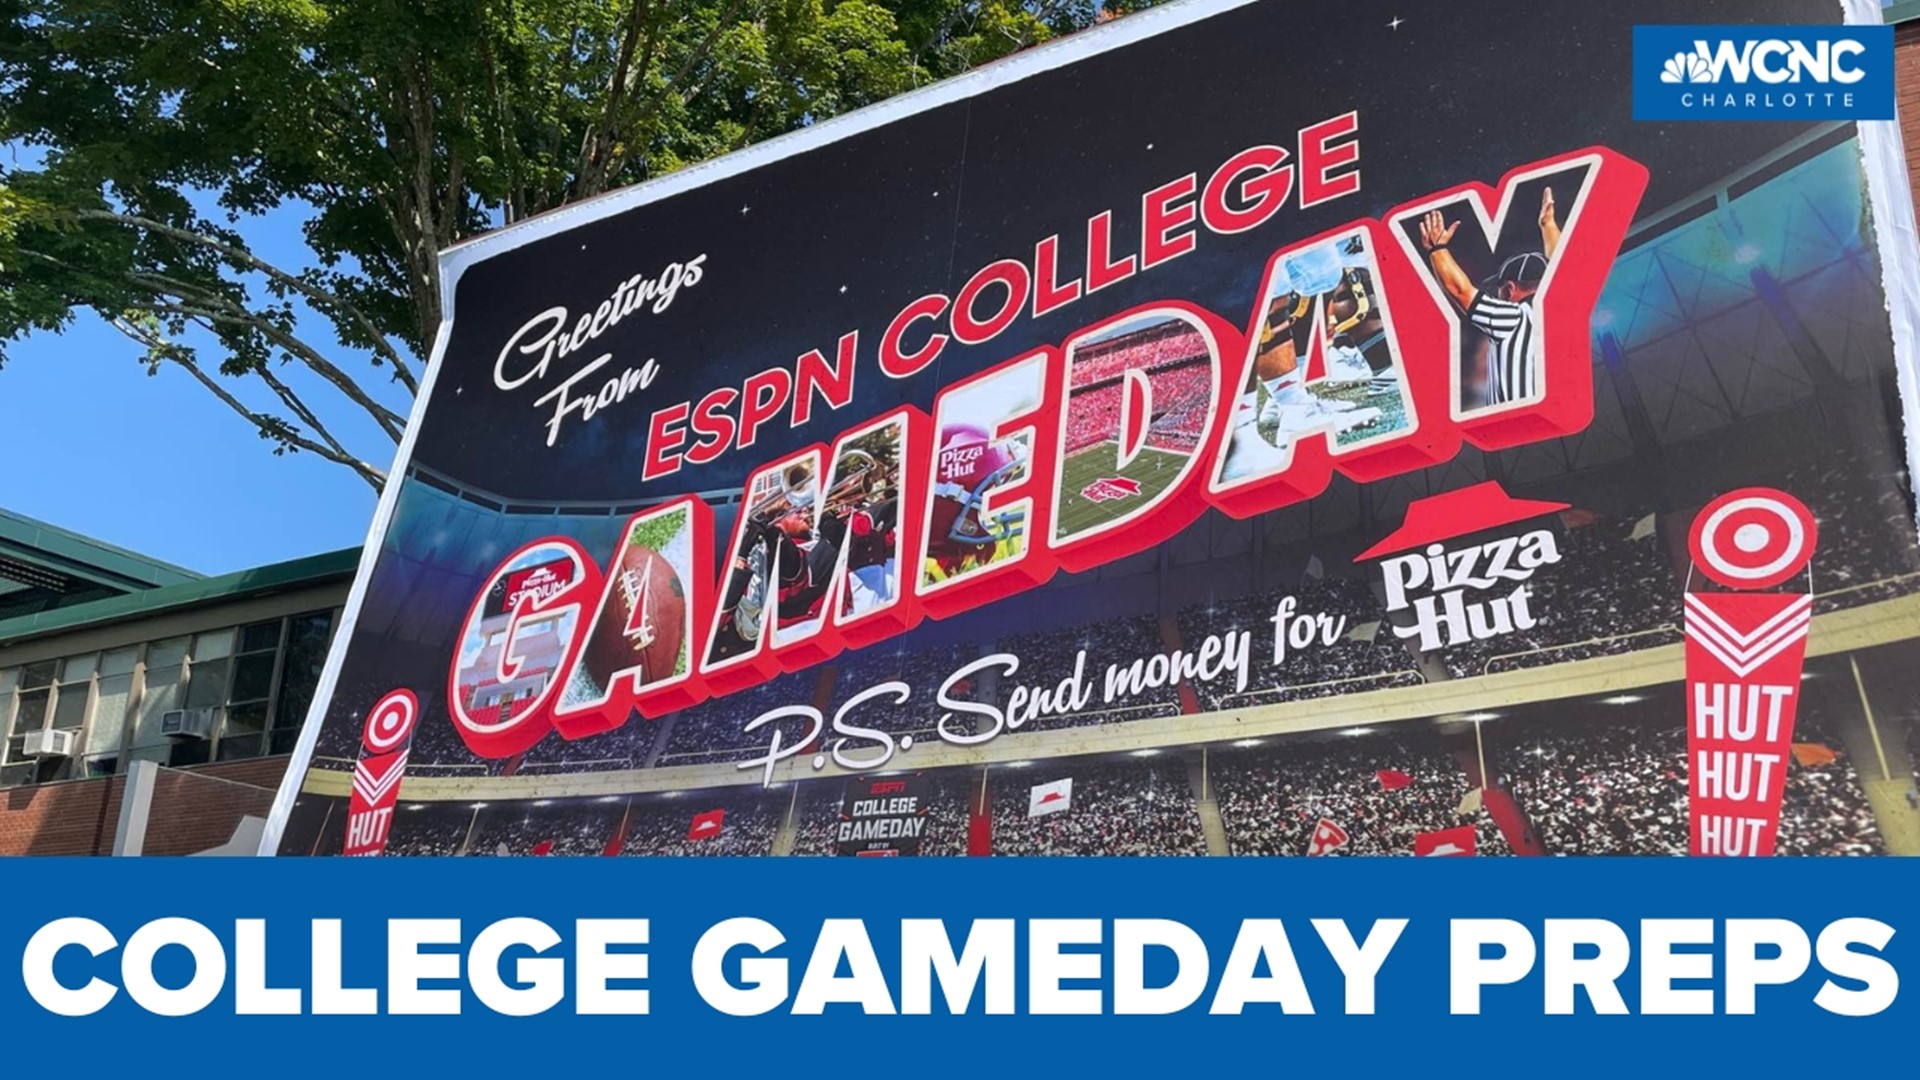 It's a big weekend for Appalachian State Football. ESPN is in town for College Gameday.